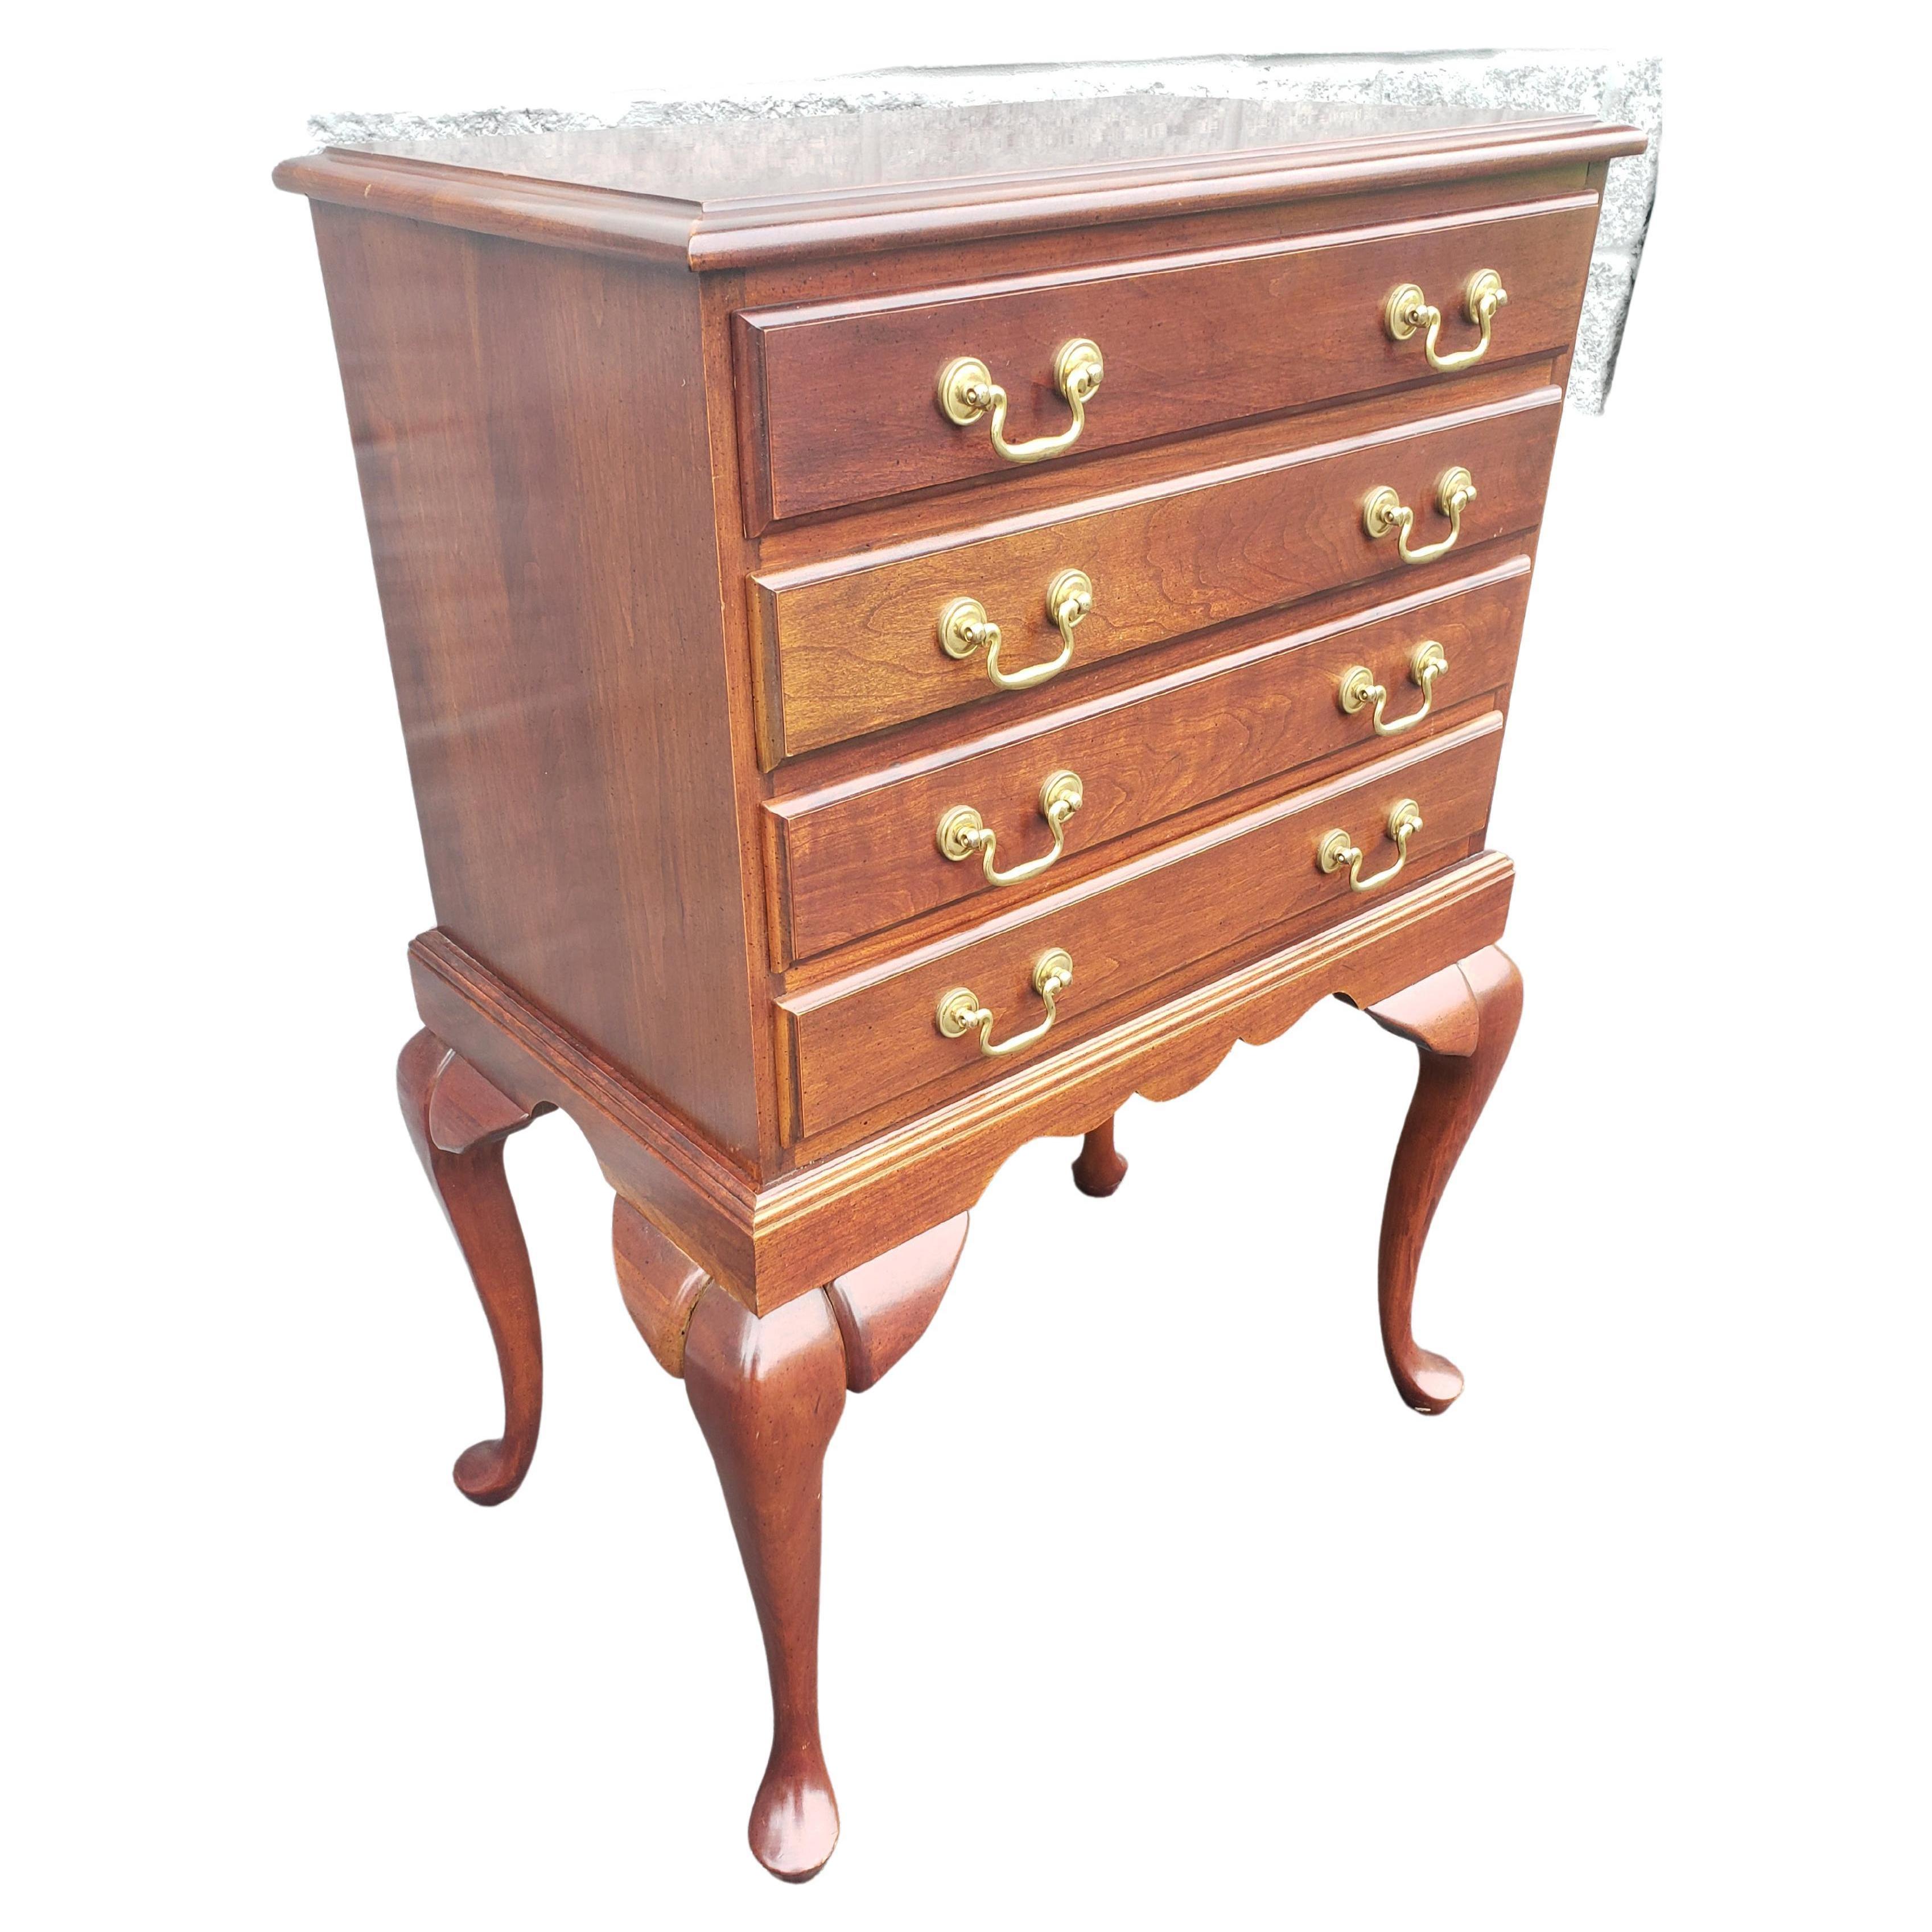 Vintage Chippendale Mahogany wood 4 drawer silver chest. Item features beautiful wood grain, 4 dovetailed drawers, solid brass hardware, quality American craftsmanship. All 4 Drawers equipped with dividers and protective silver clothe lining.